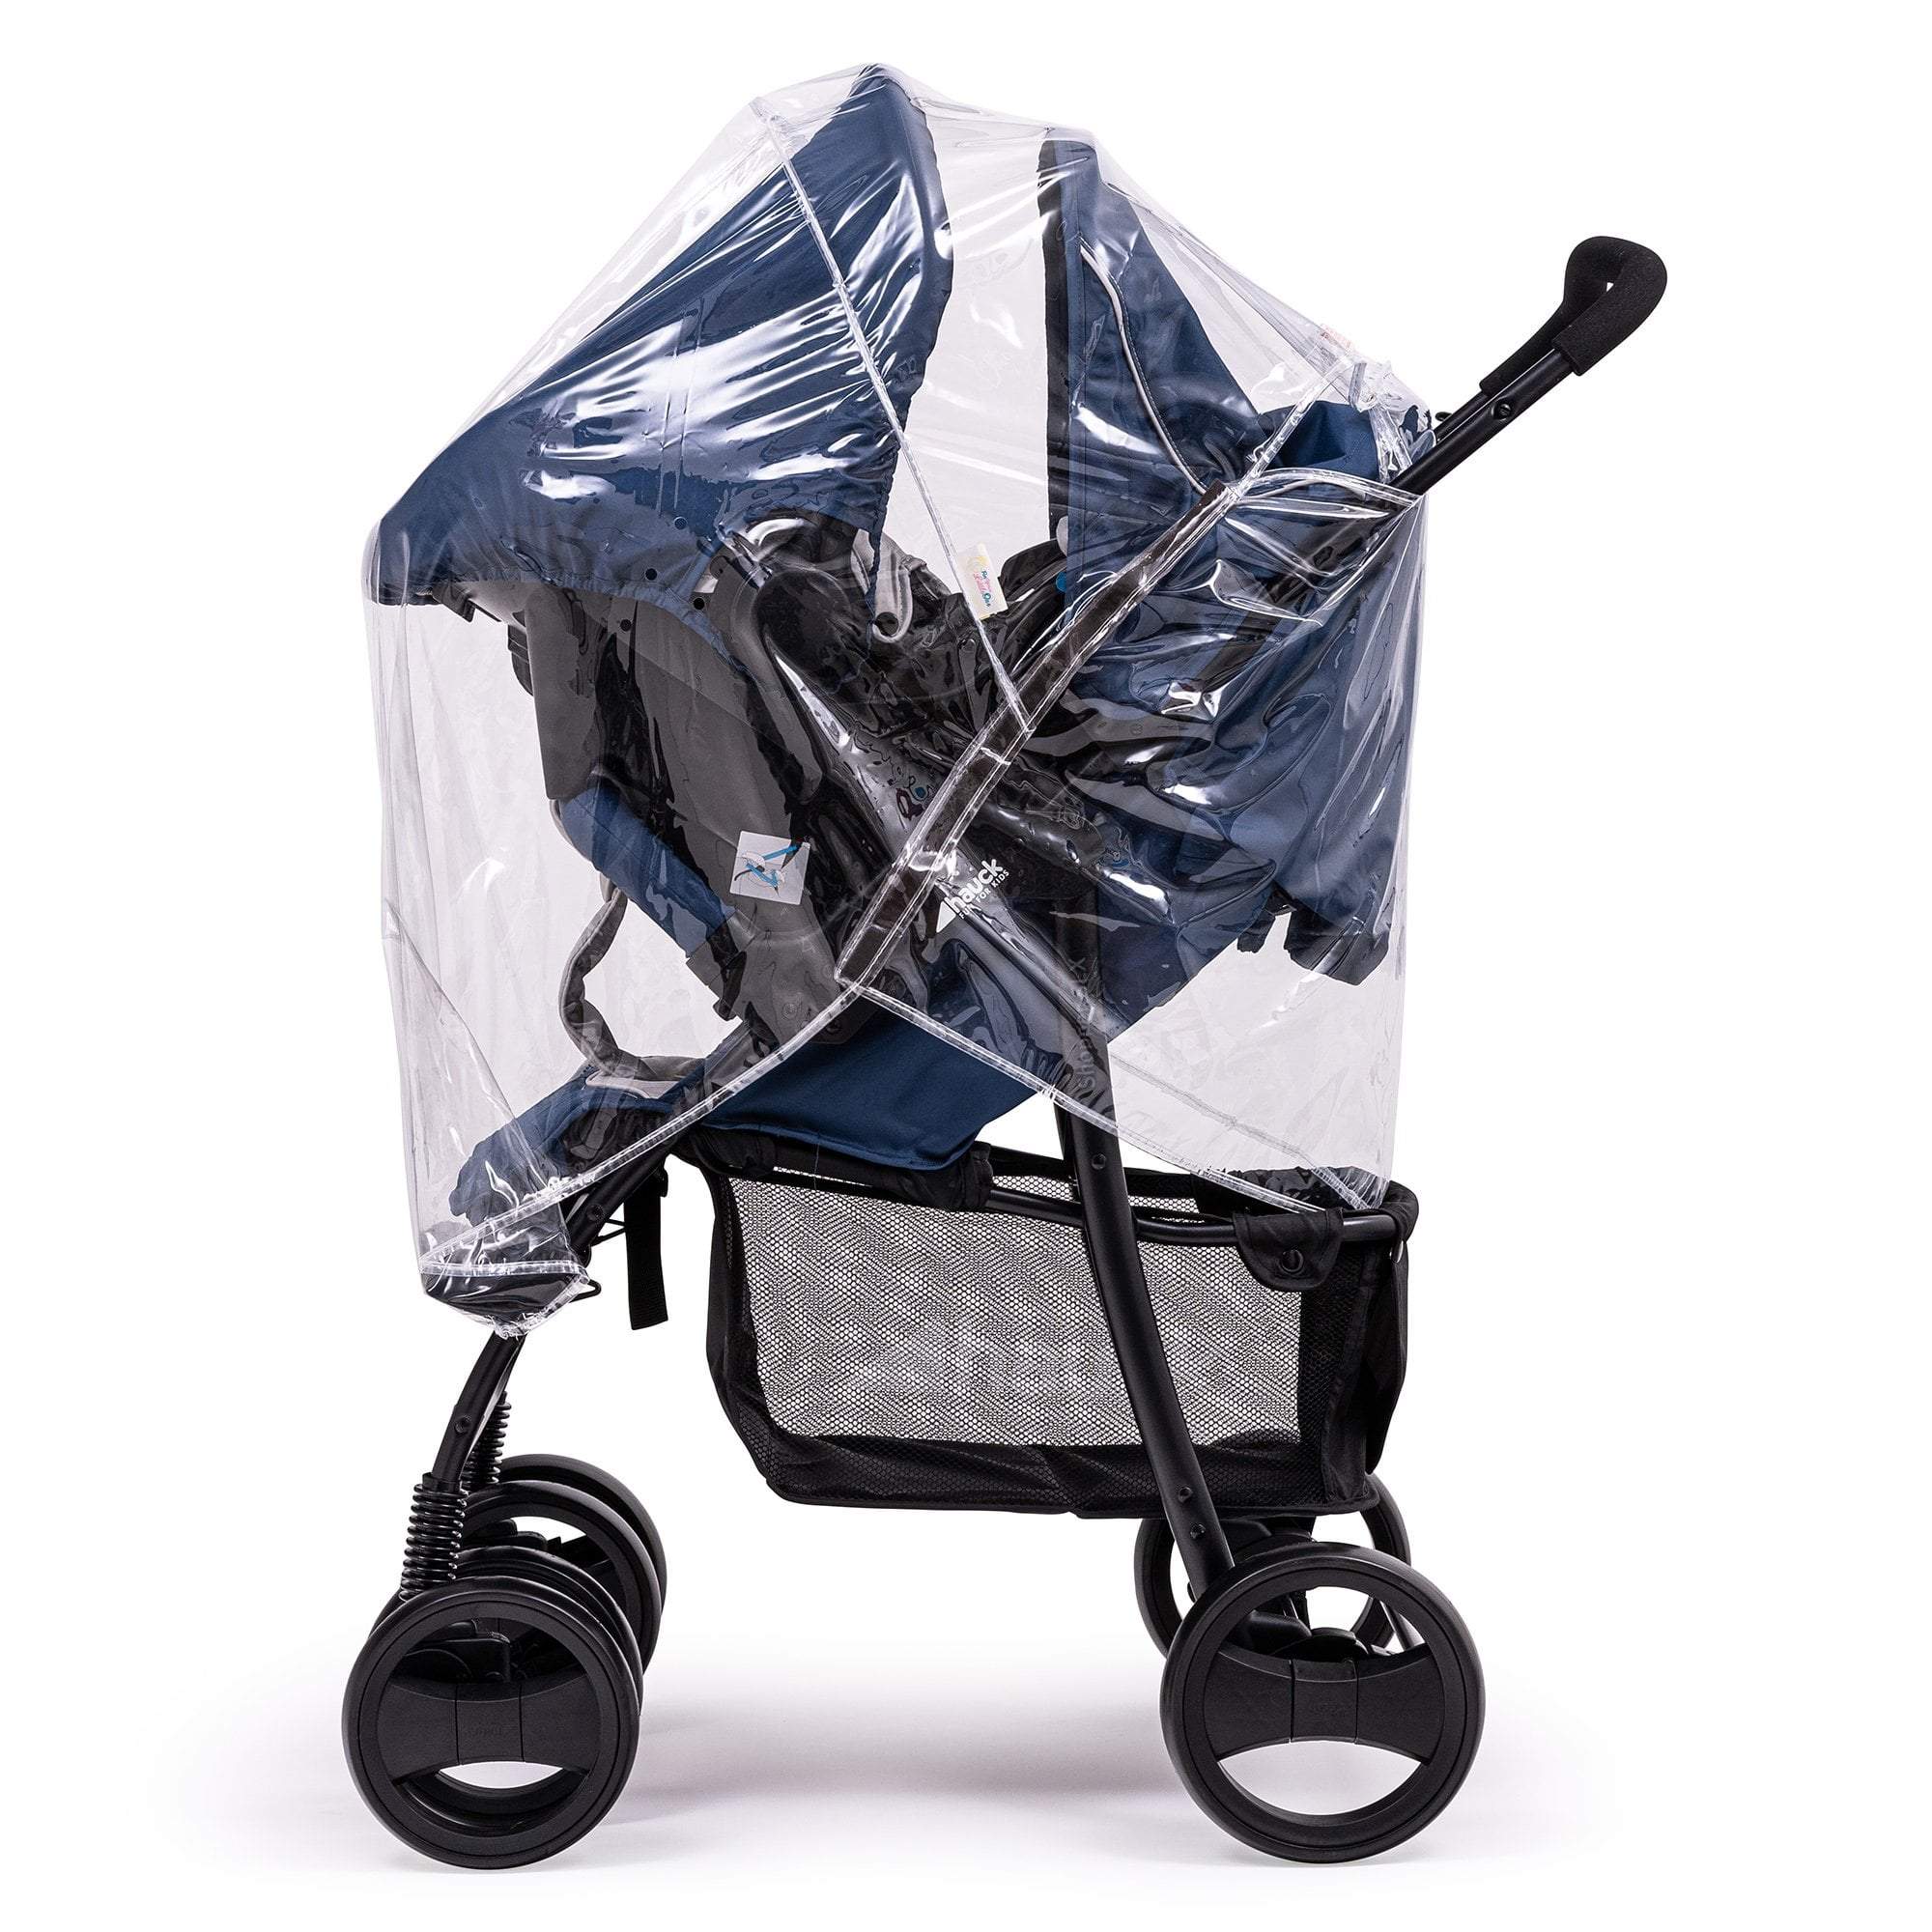 Travel System Raincover Compatible with Mothercare - Fits All Models - For Your Little One